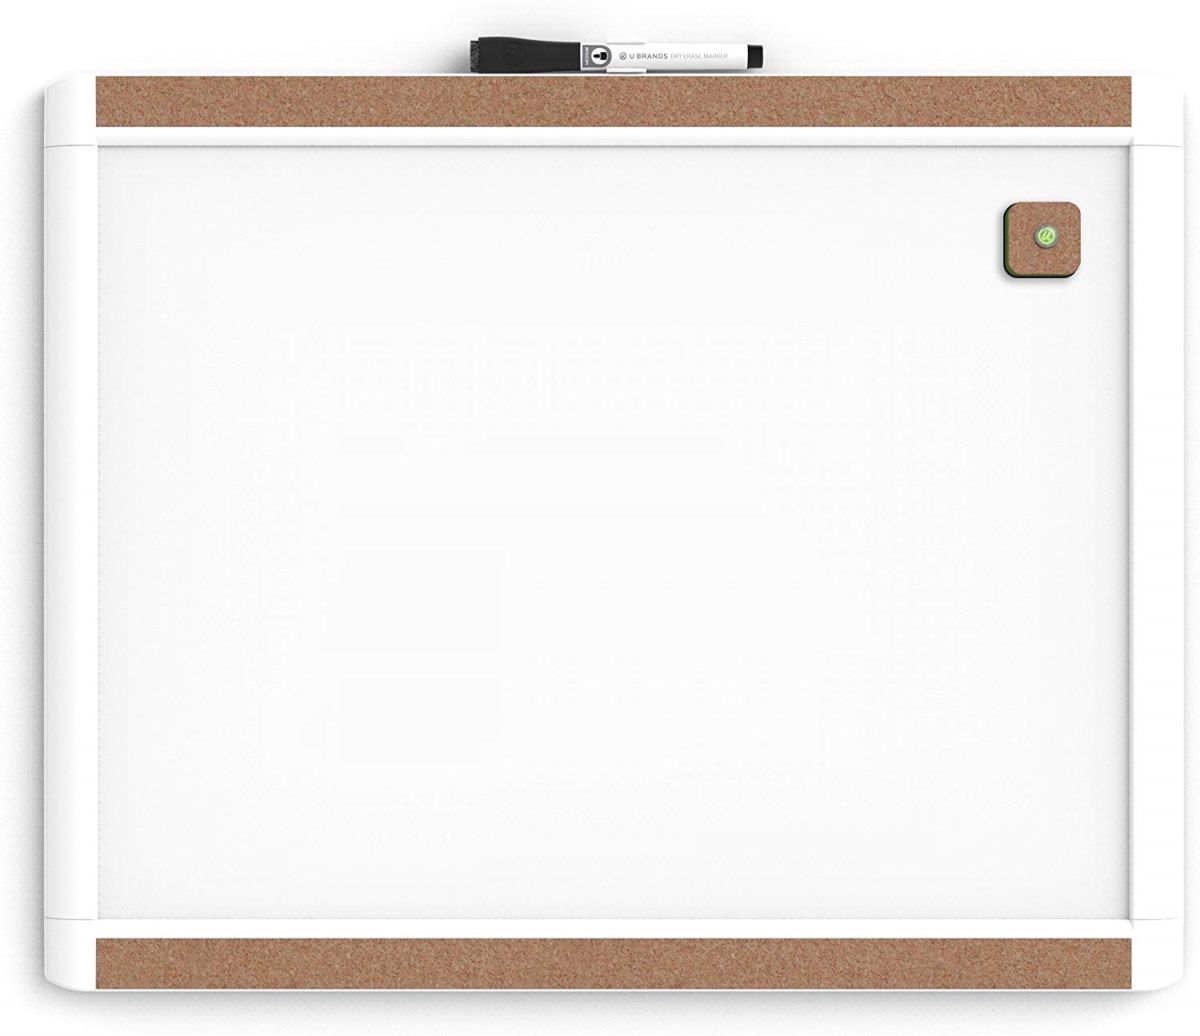 Charles Leonard Chl35204 Magnetic Dry Erase Boards Frames, Assorted Colors - 4 Box